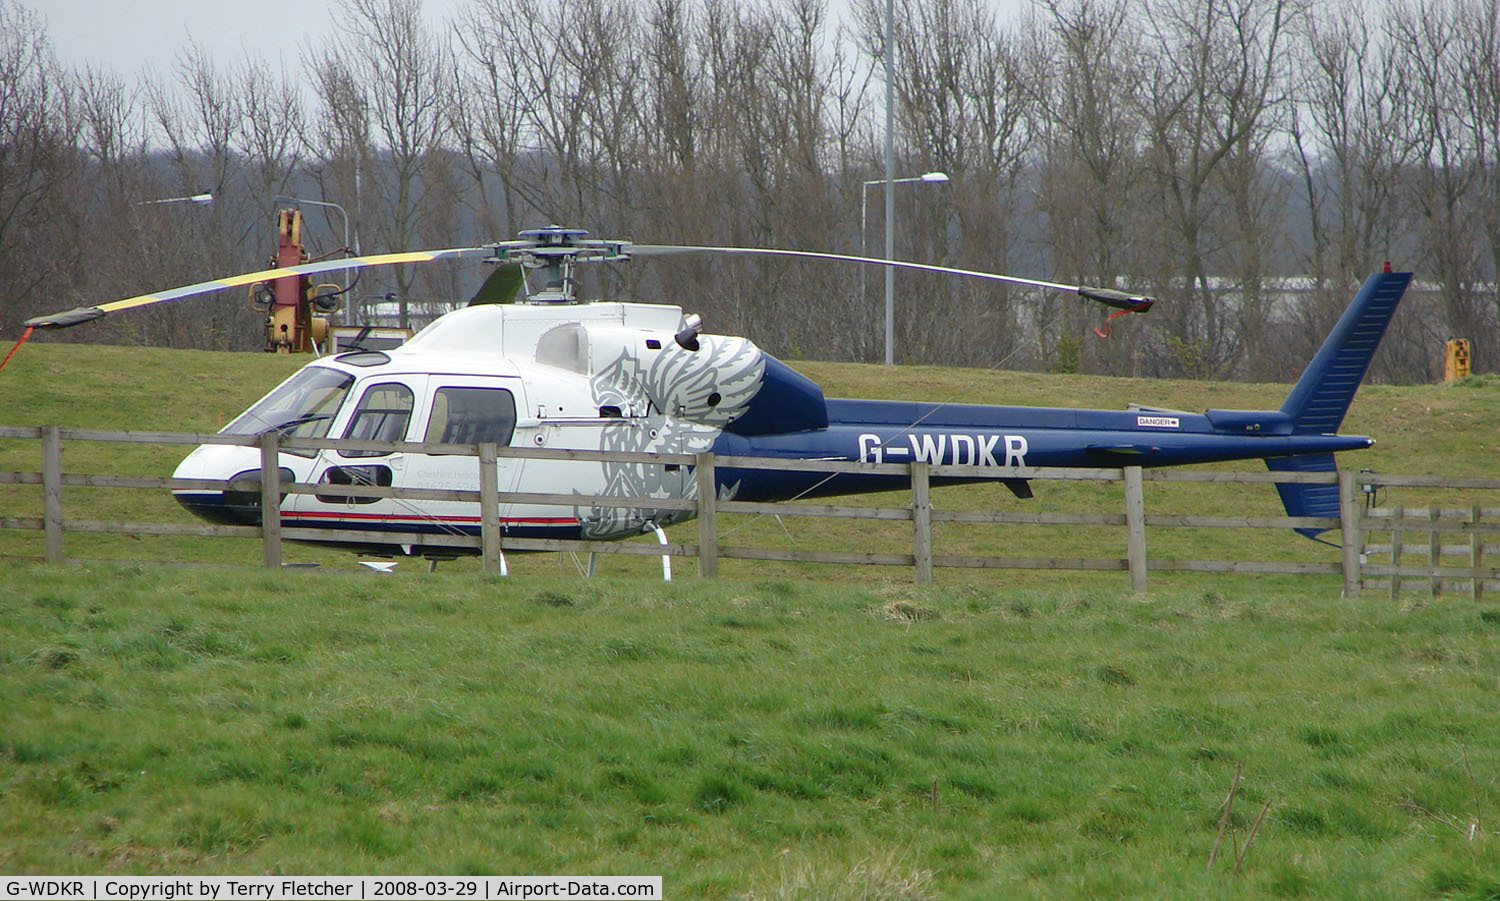 G-WDKR, 1981 Aerospatiale AS-355F-1 Ecureuil 2 C/N 5115, Noted at Farm House in Bedfordshire